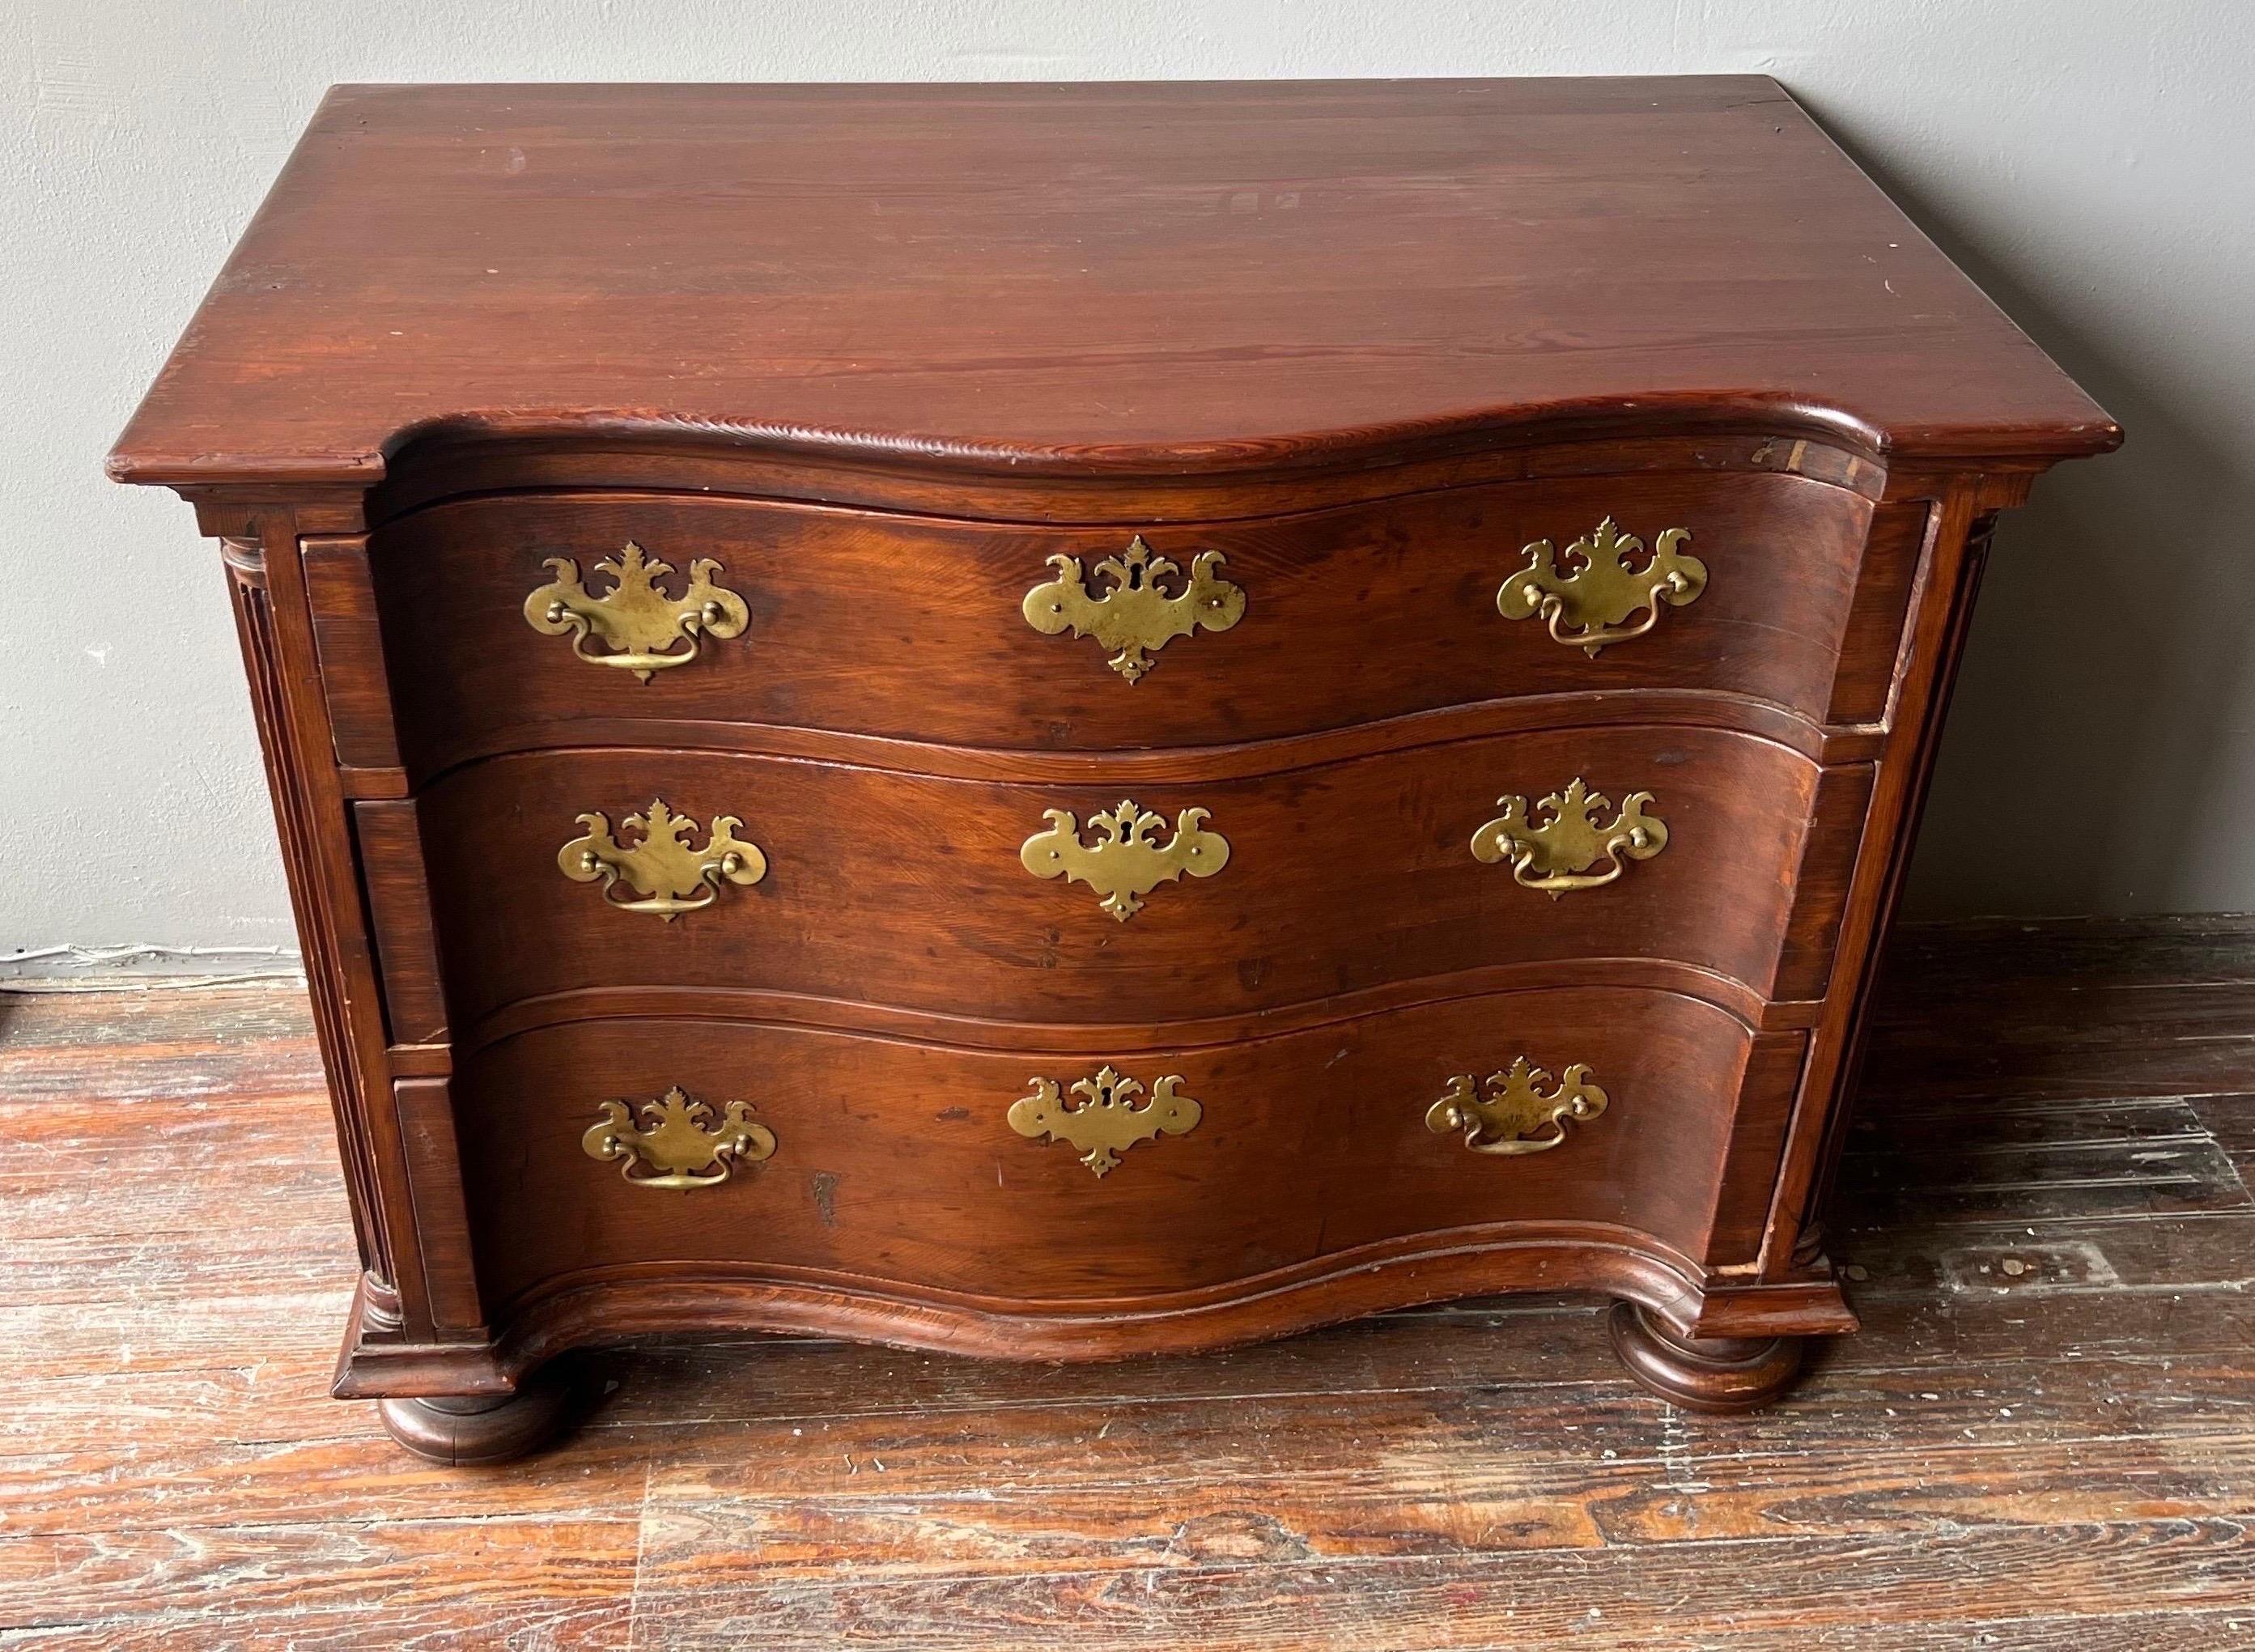 Early 18th century serpentine 3 drawer chest with quarter columns, original trunnel nails and original removable feet. Made entirely of yellow pine and poplar. Possibly made in the back country of the south. 